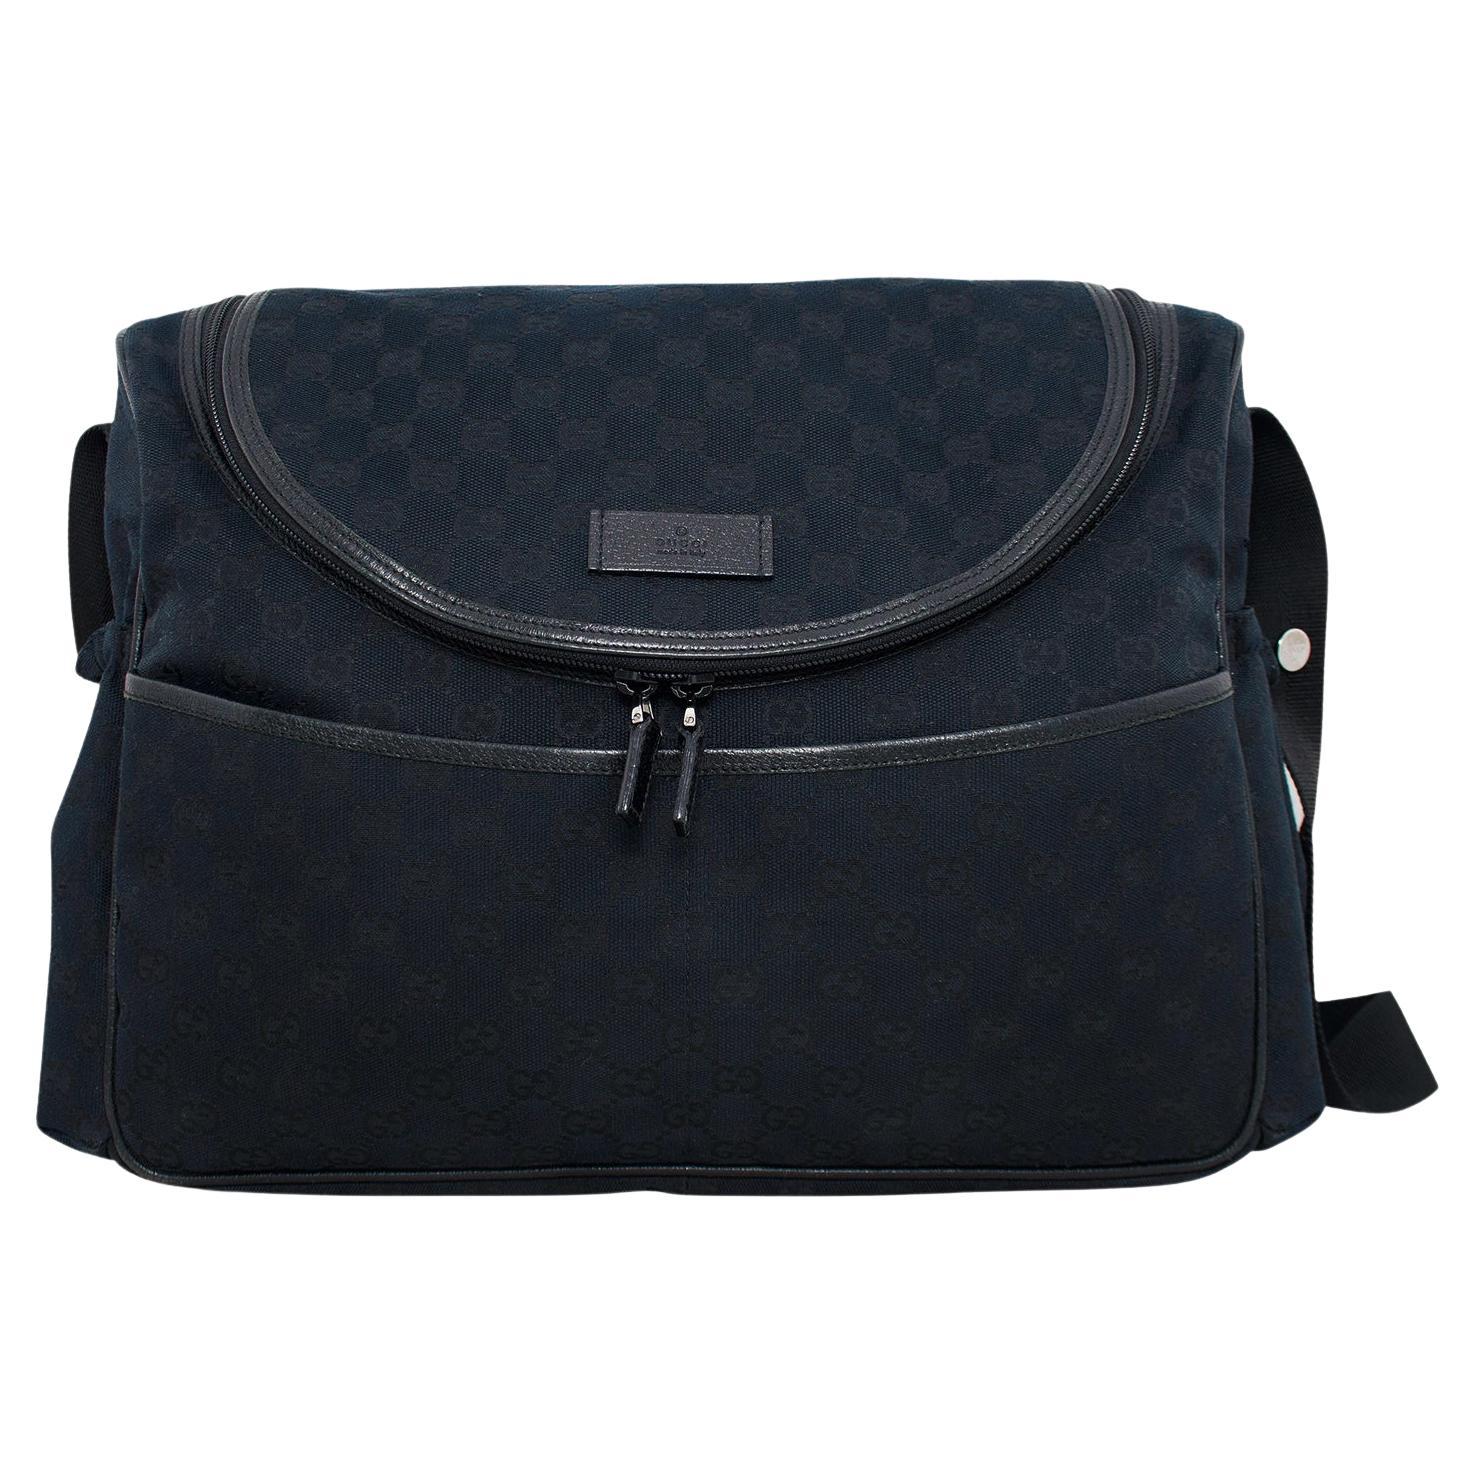 Gucci Diaper Bag - 4 For Sale on 1stDibs | gucci baby bag, gucci changing  bag, gucci baby bag sale